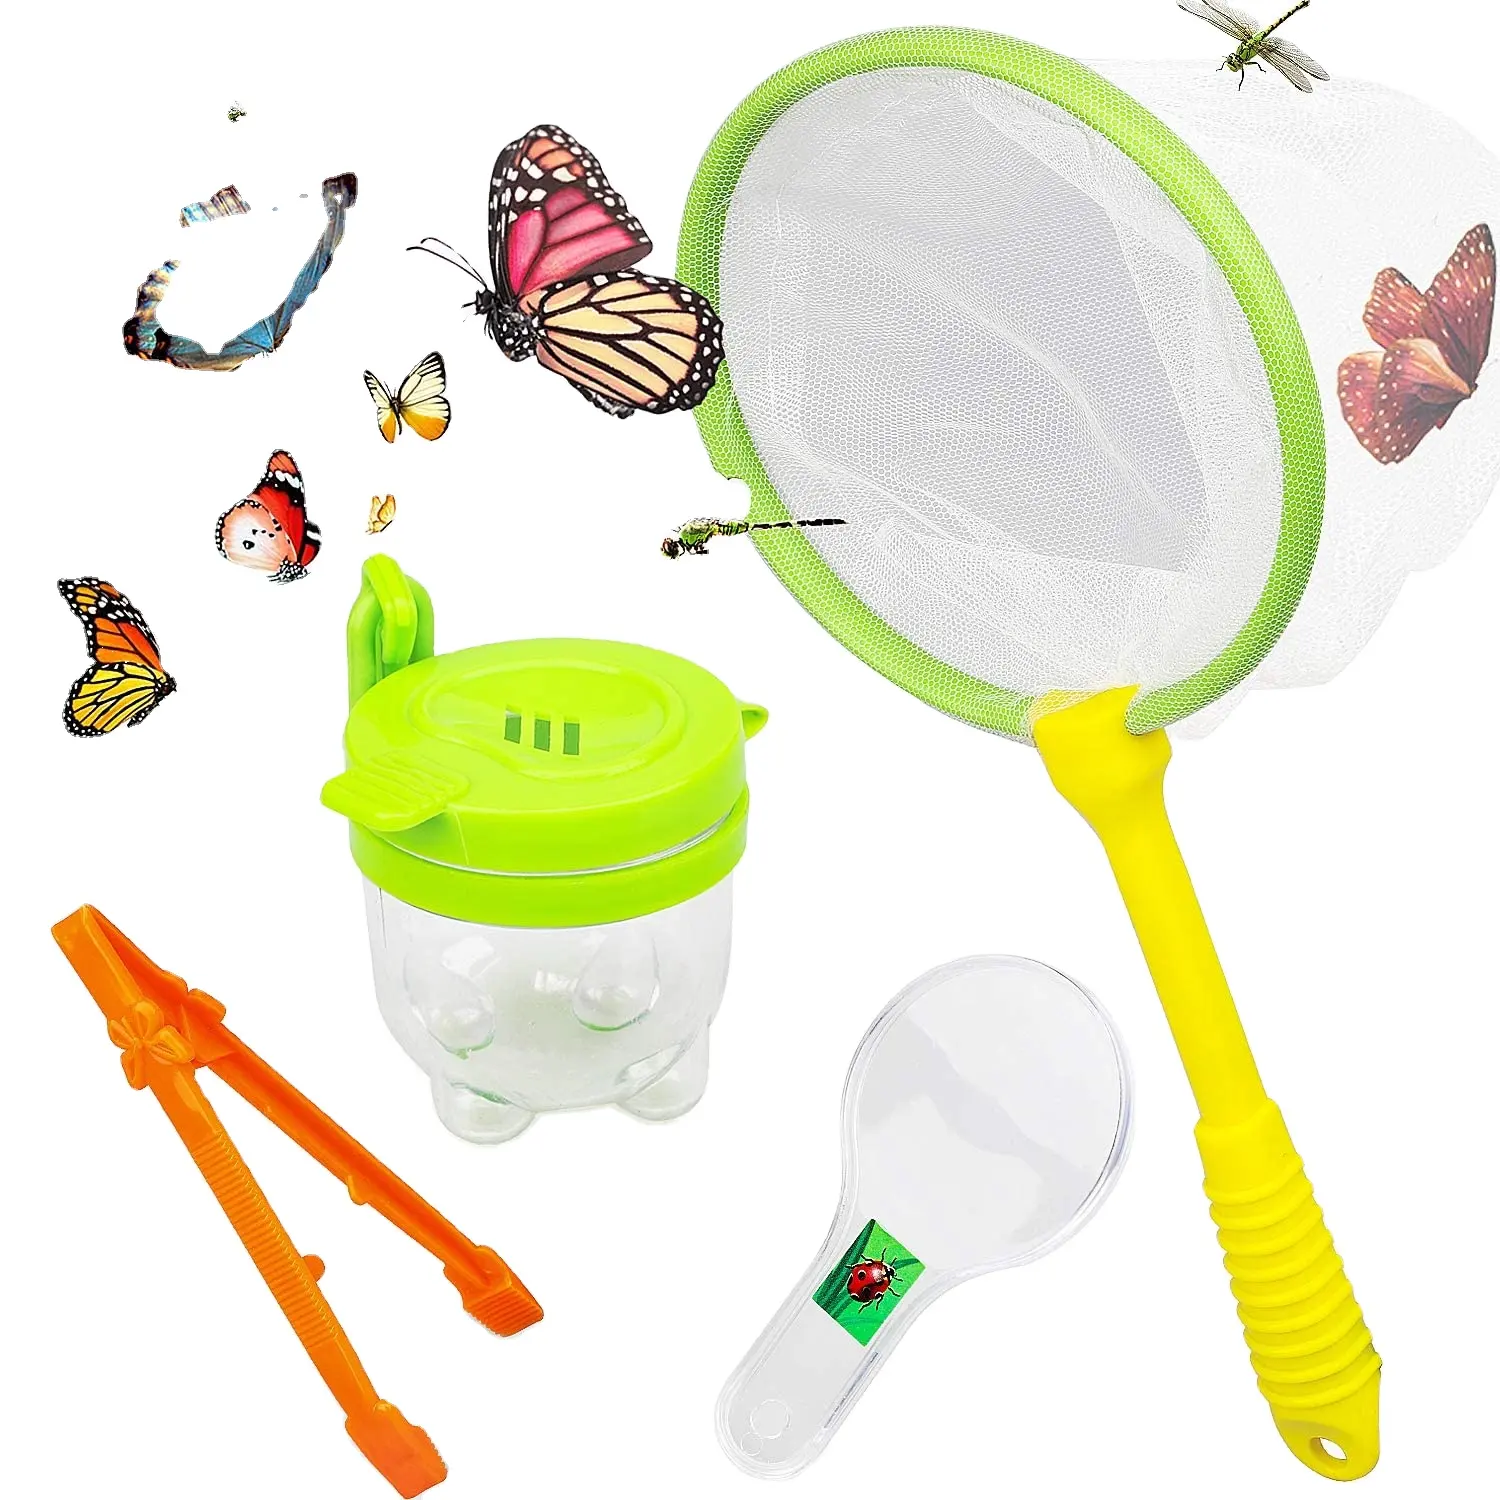 Free Sample Bug Catcher Kit for Kids Includes Butterfly Net, Bug Observation Capsule and Magnifying Glass | Science Toy for